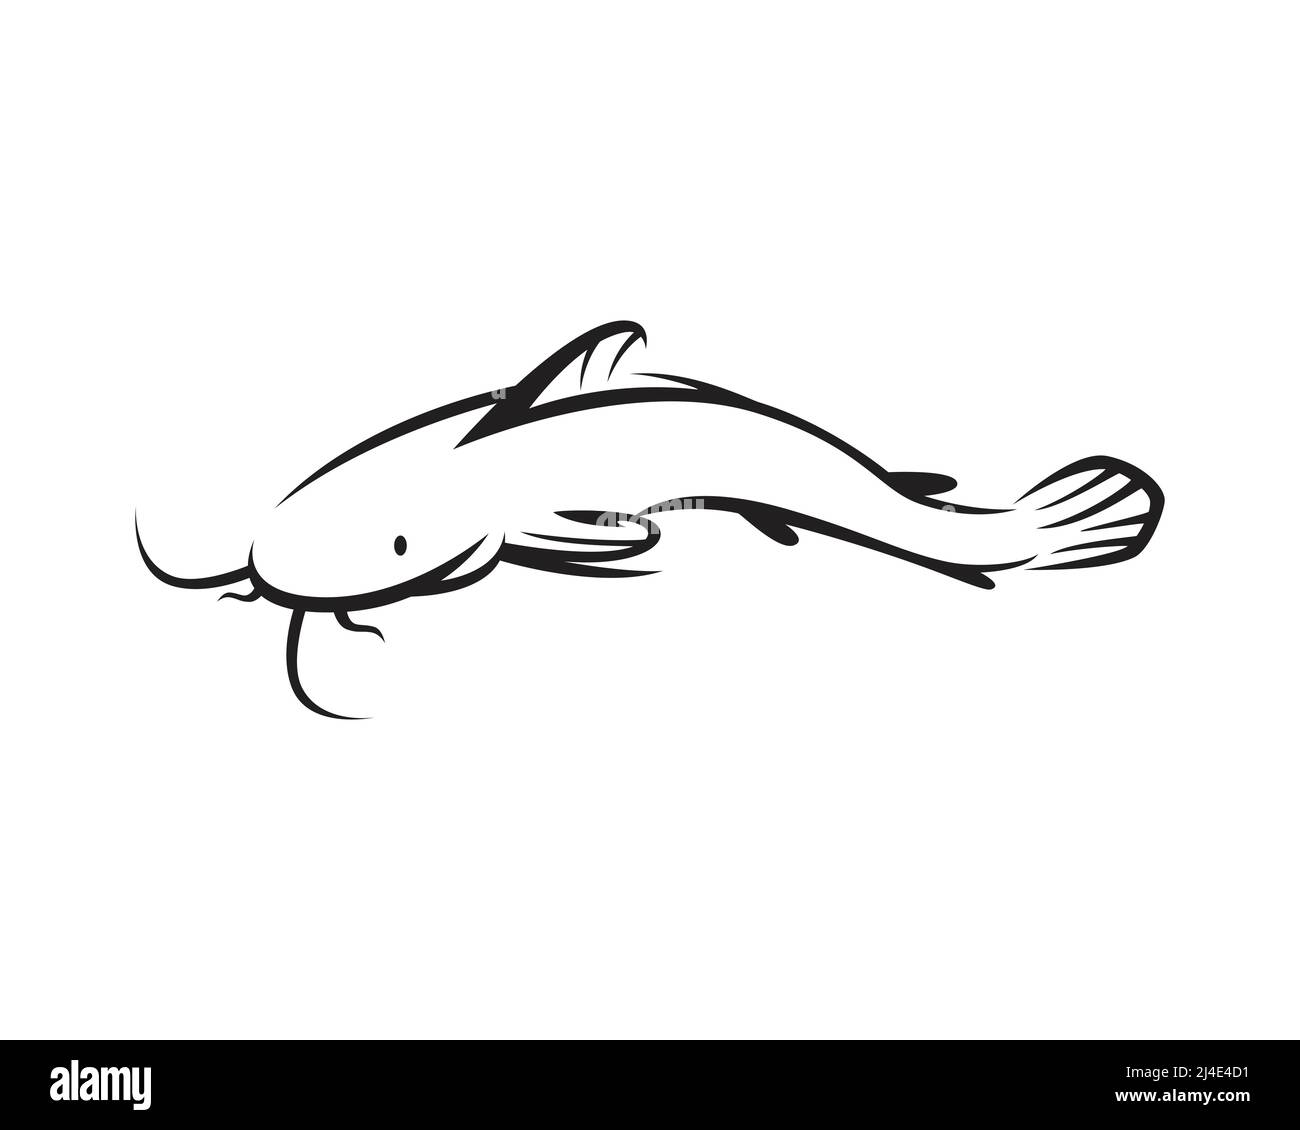 Swimming Catfish, Clarias and Lele Illustration with Silhouette Style Vector Stock Vector